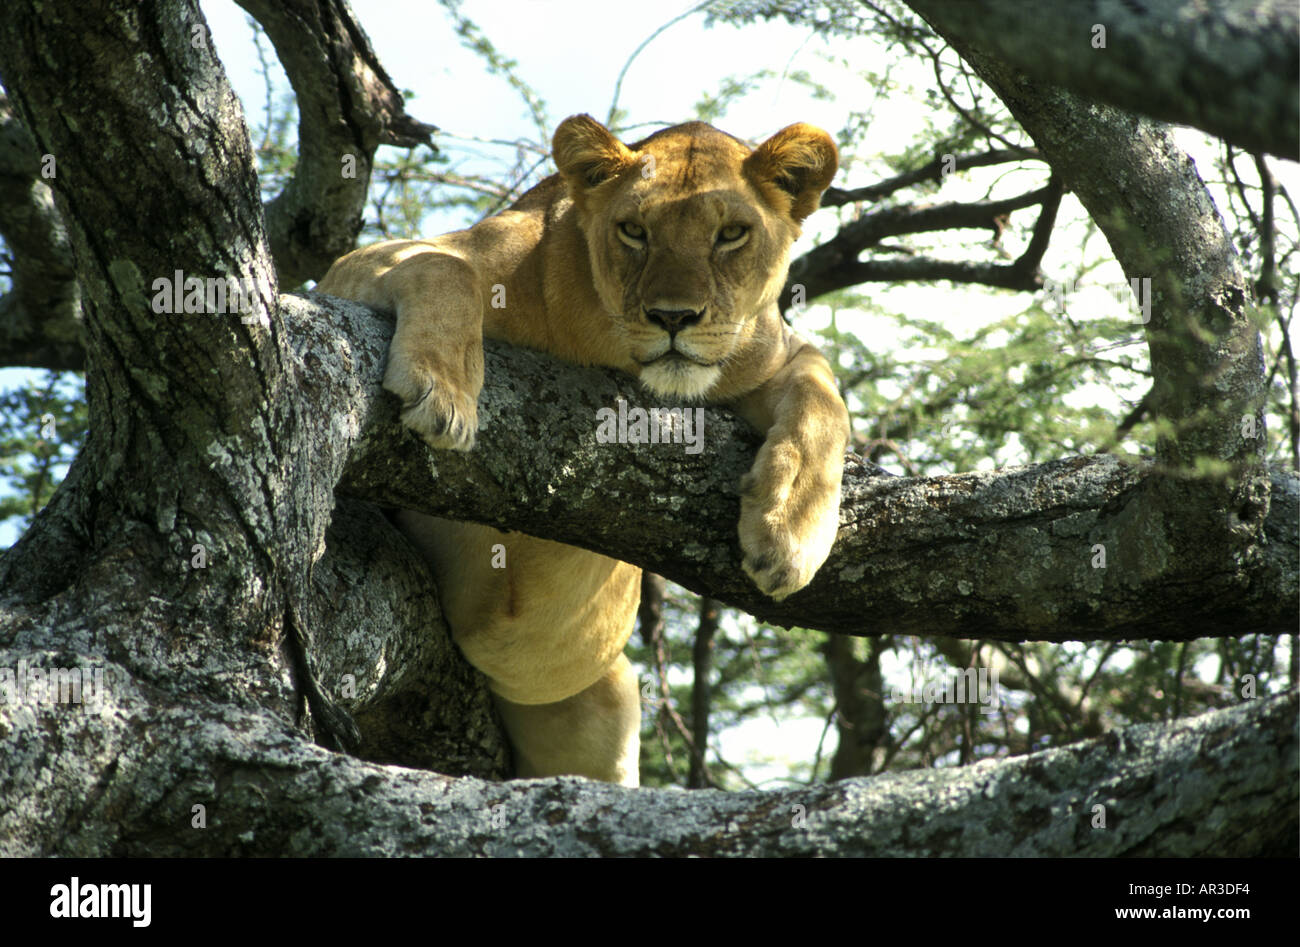 A well fed lioness with a full stomach resting in the branches of a tree Stock Photo